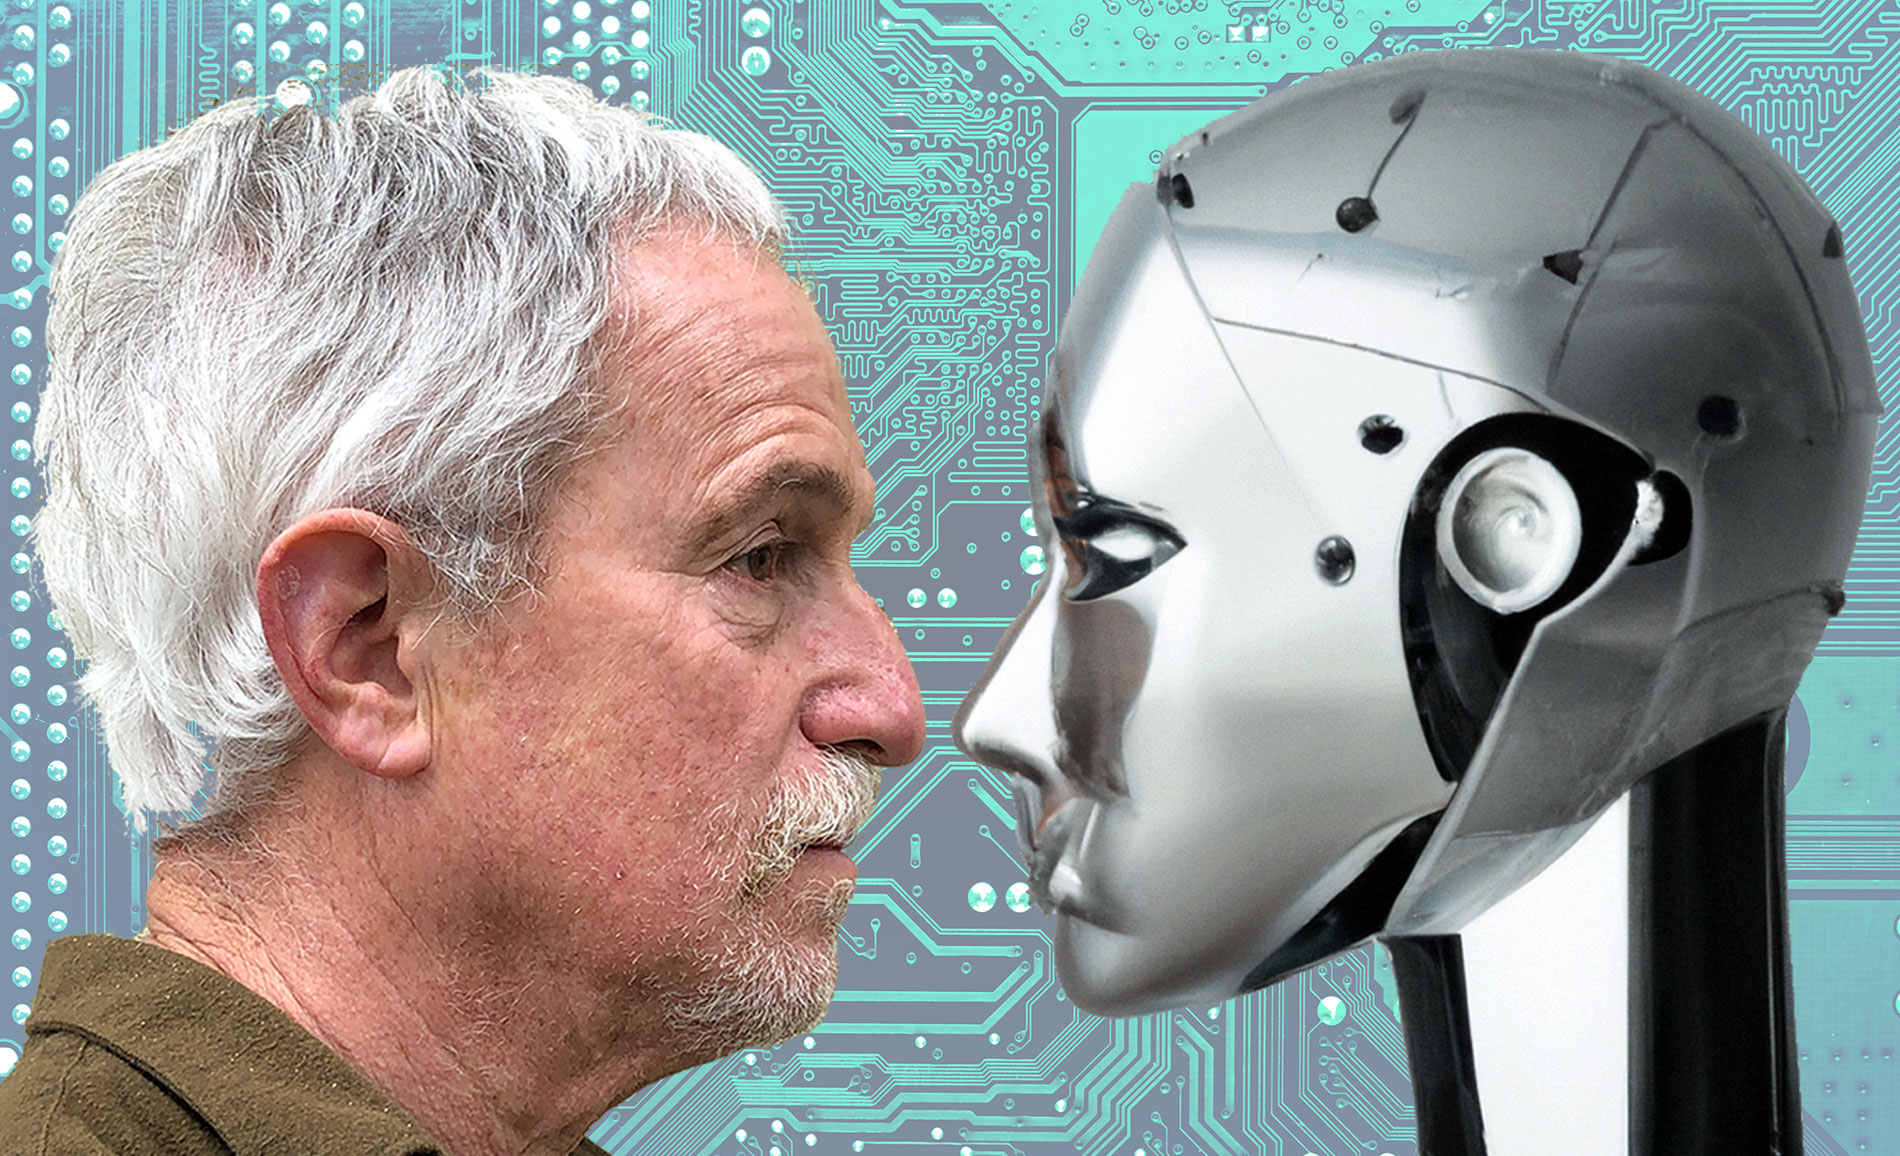 my-exclusive-interview-with-chatgpt-about-ai,-climate-tech-and-sustainability-|-greenbiz